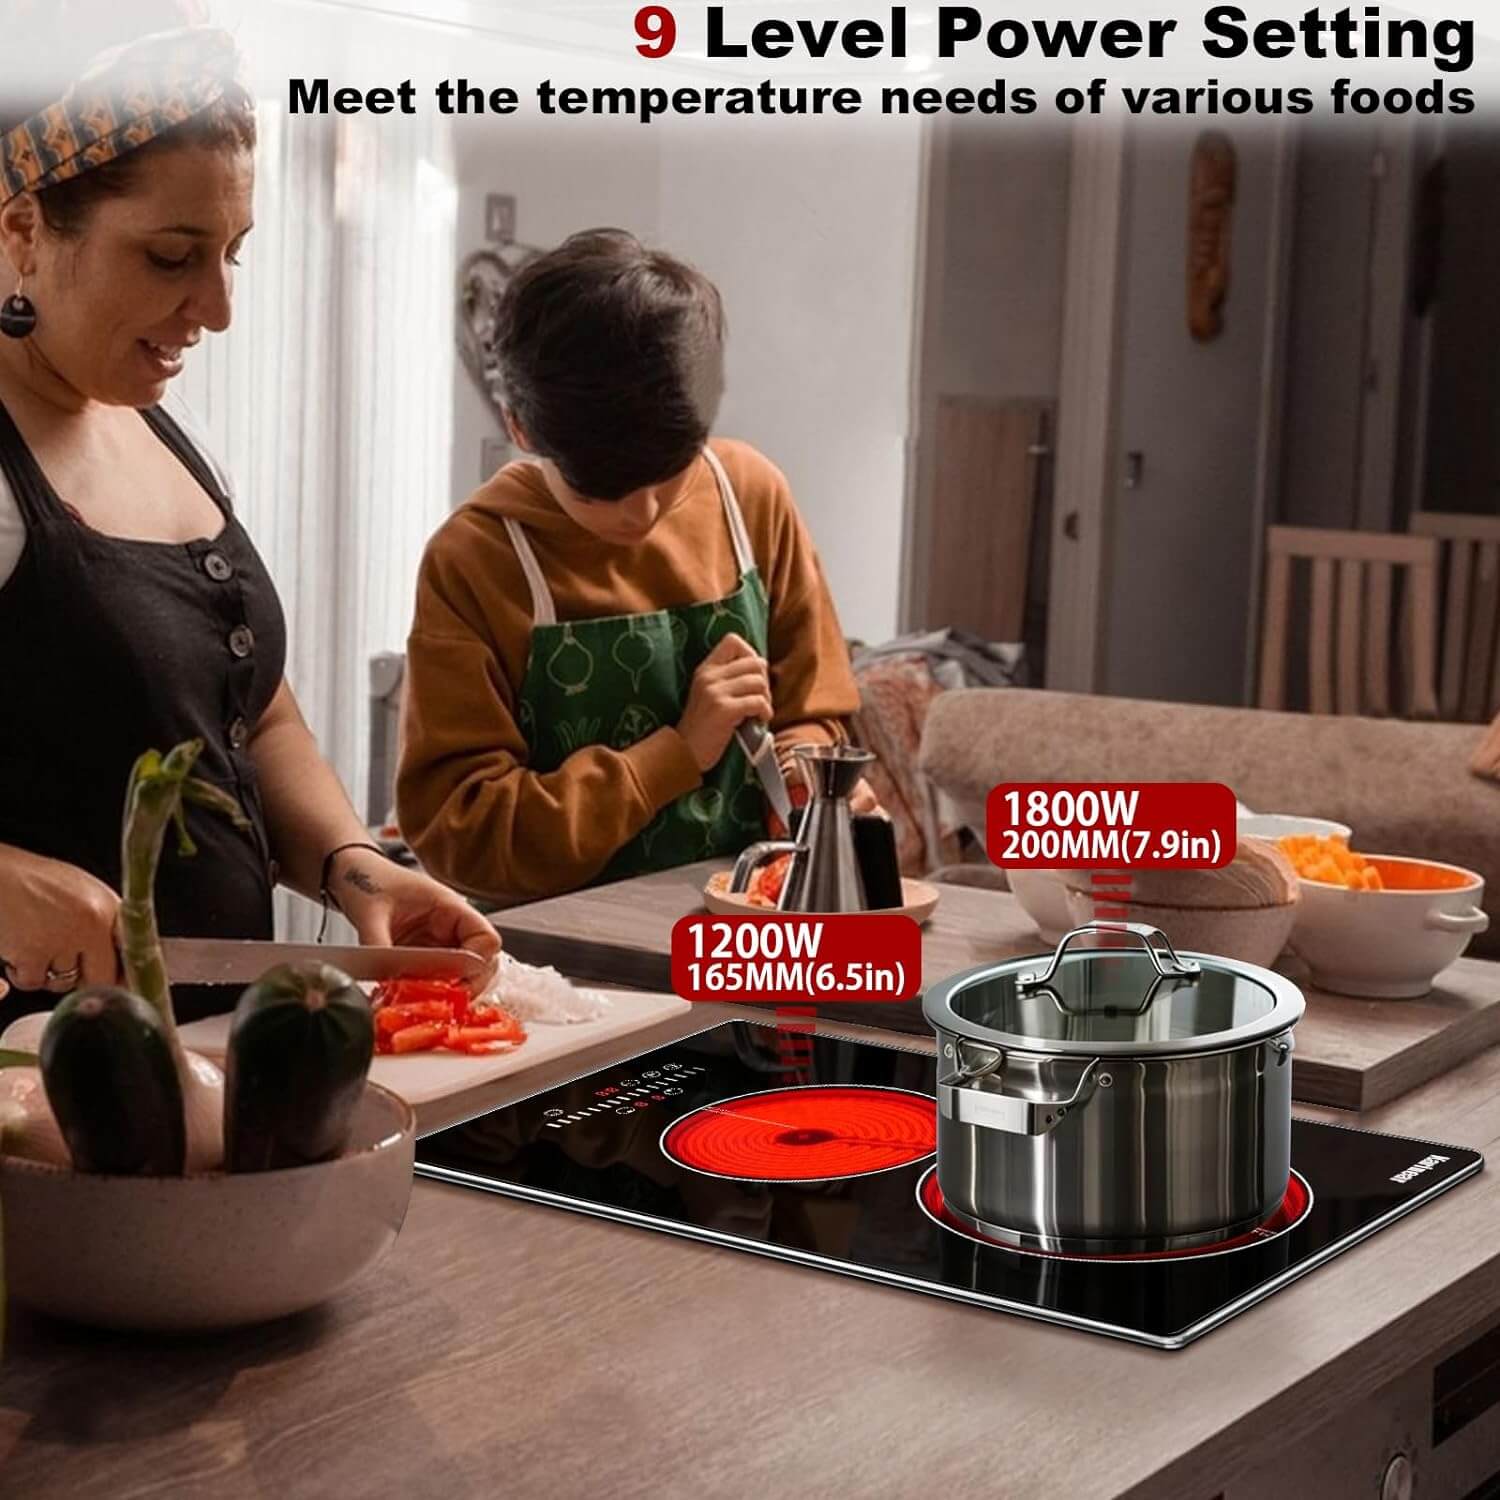 12 Inch 2 Burners Portable Electric Ceramic Cooktop-Sensor Touch Control